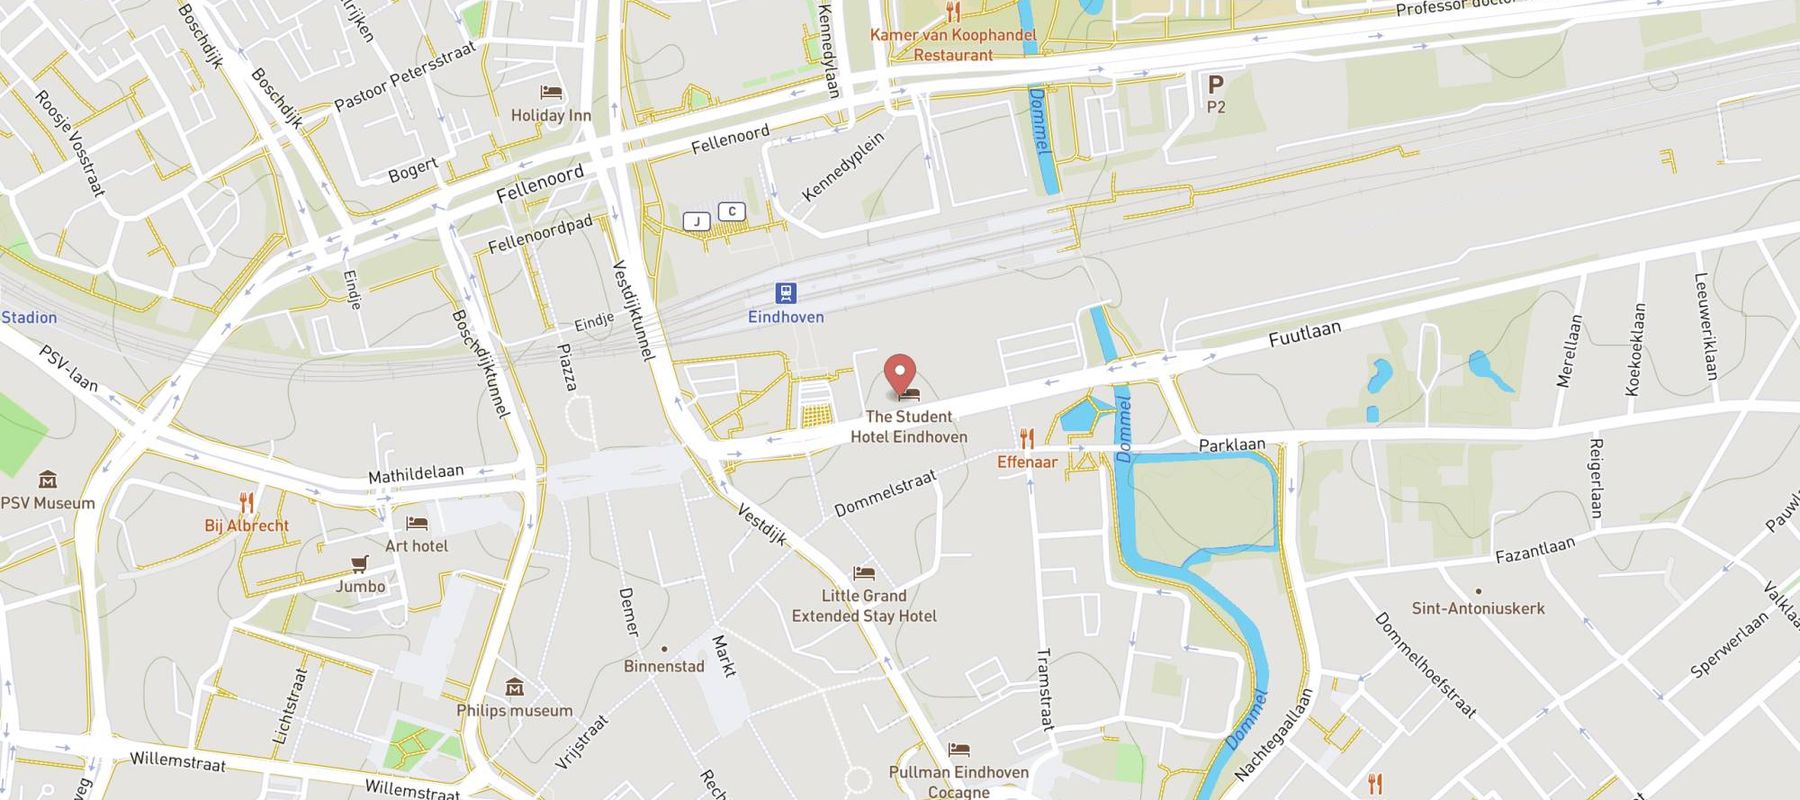 The Student Hotel Eindhoven map